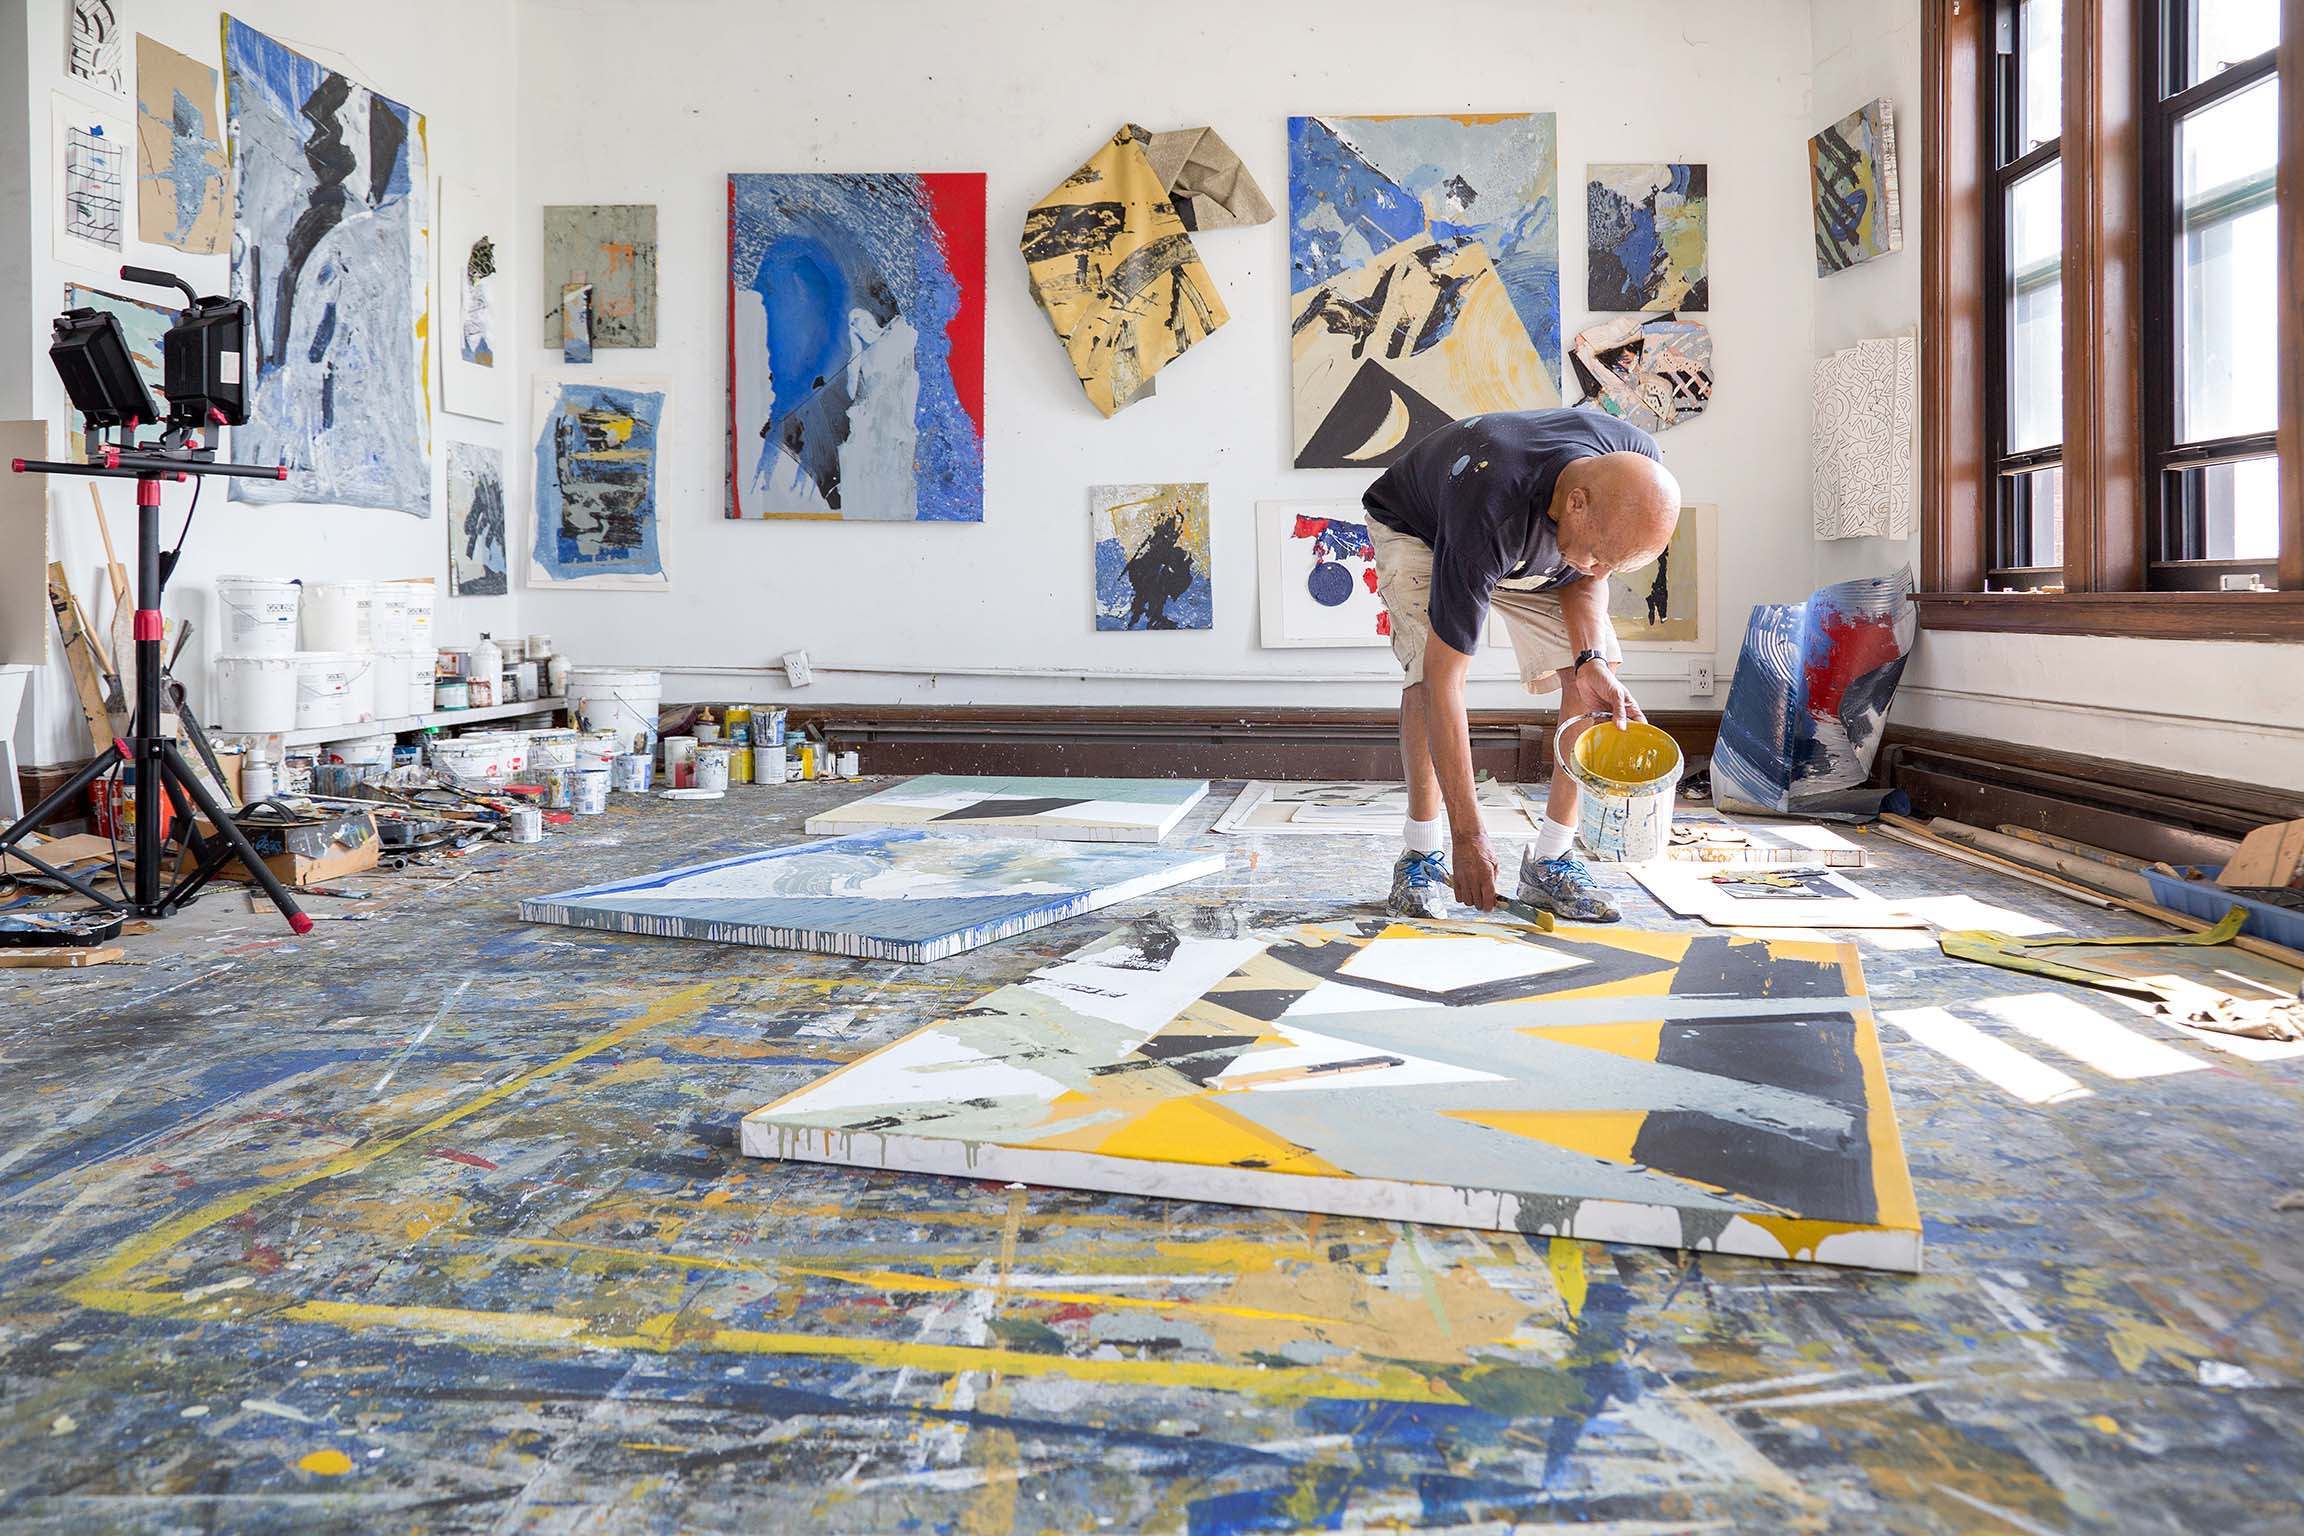 Person leaning over with brush in hand to apply paint to large canvas laying horizontally on the floor. The person is painting in a studio brightly lit with natural light from windows in the right of frame. Various paintings are hung around the walls. A large paint spattered tarp covers the floor.